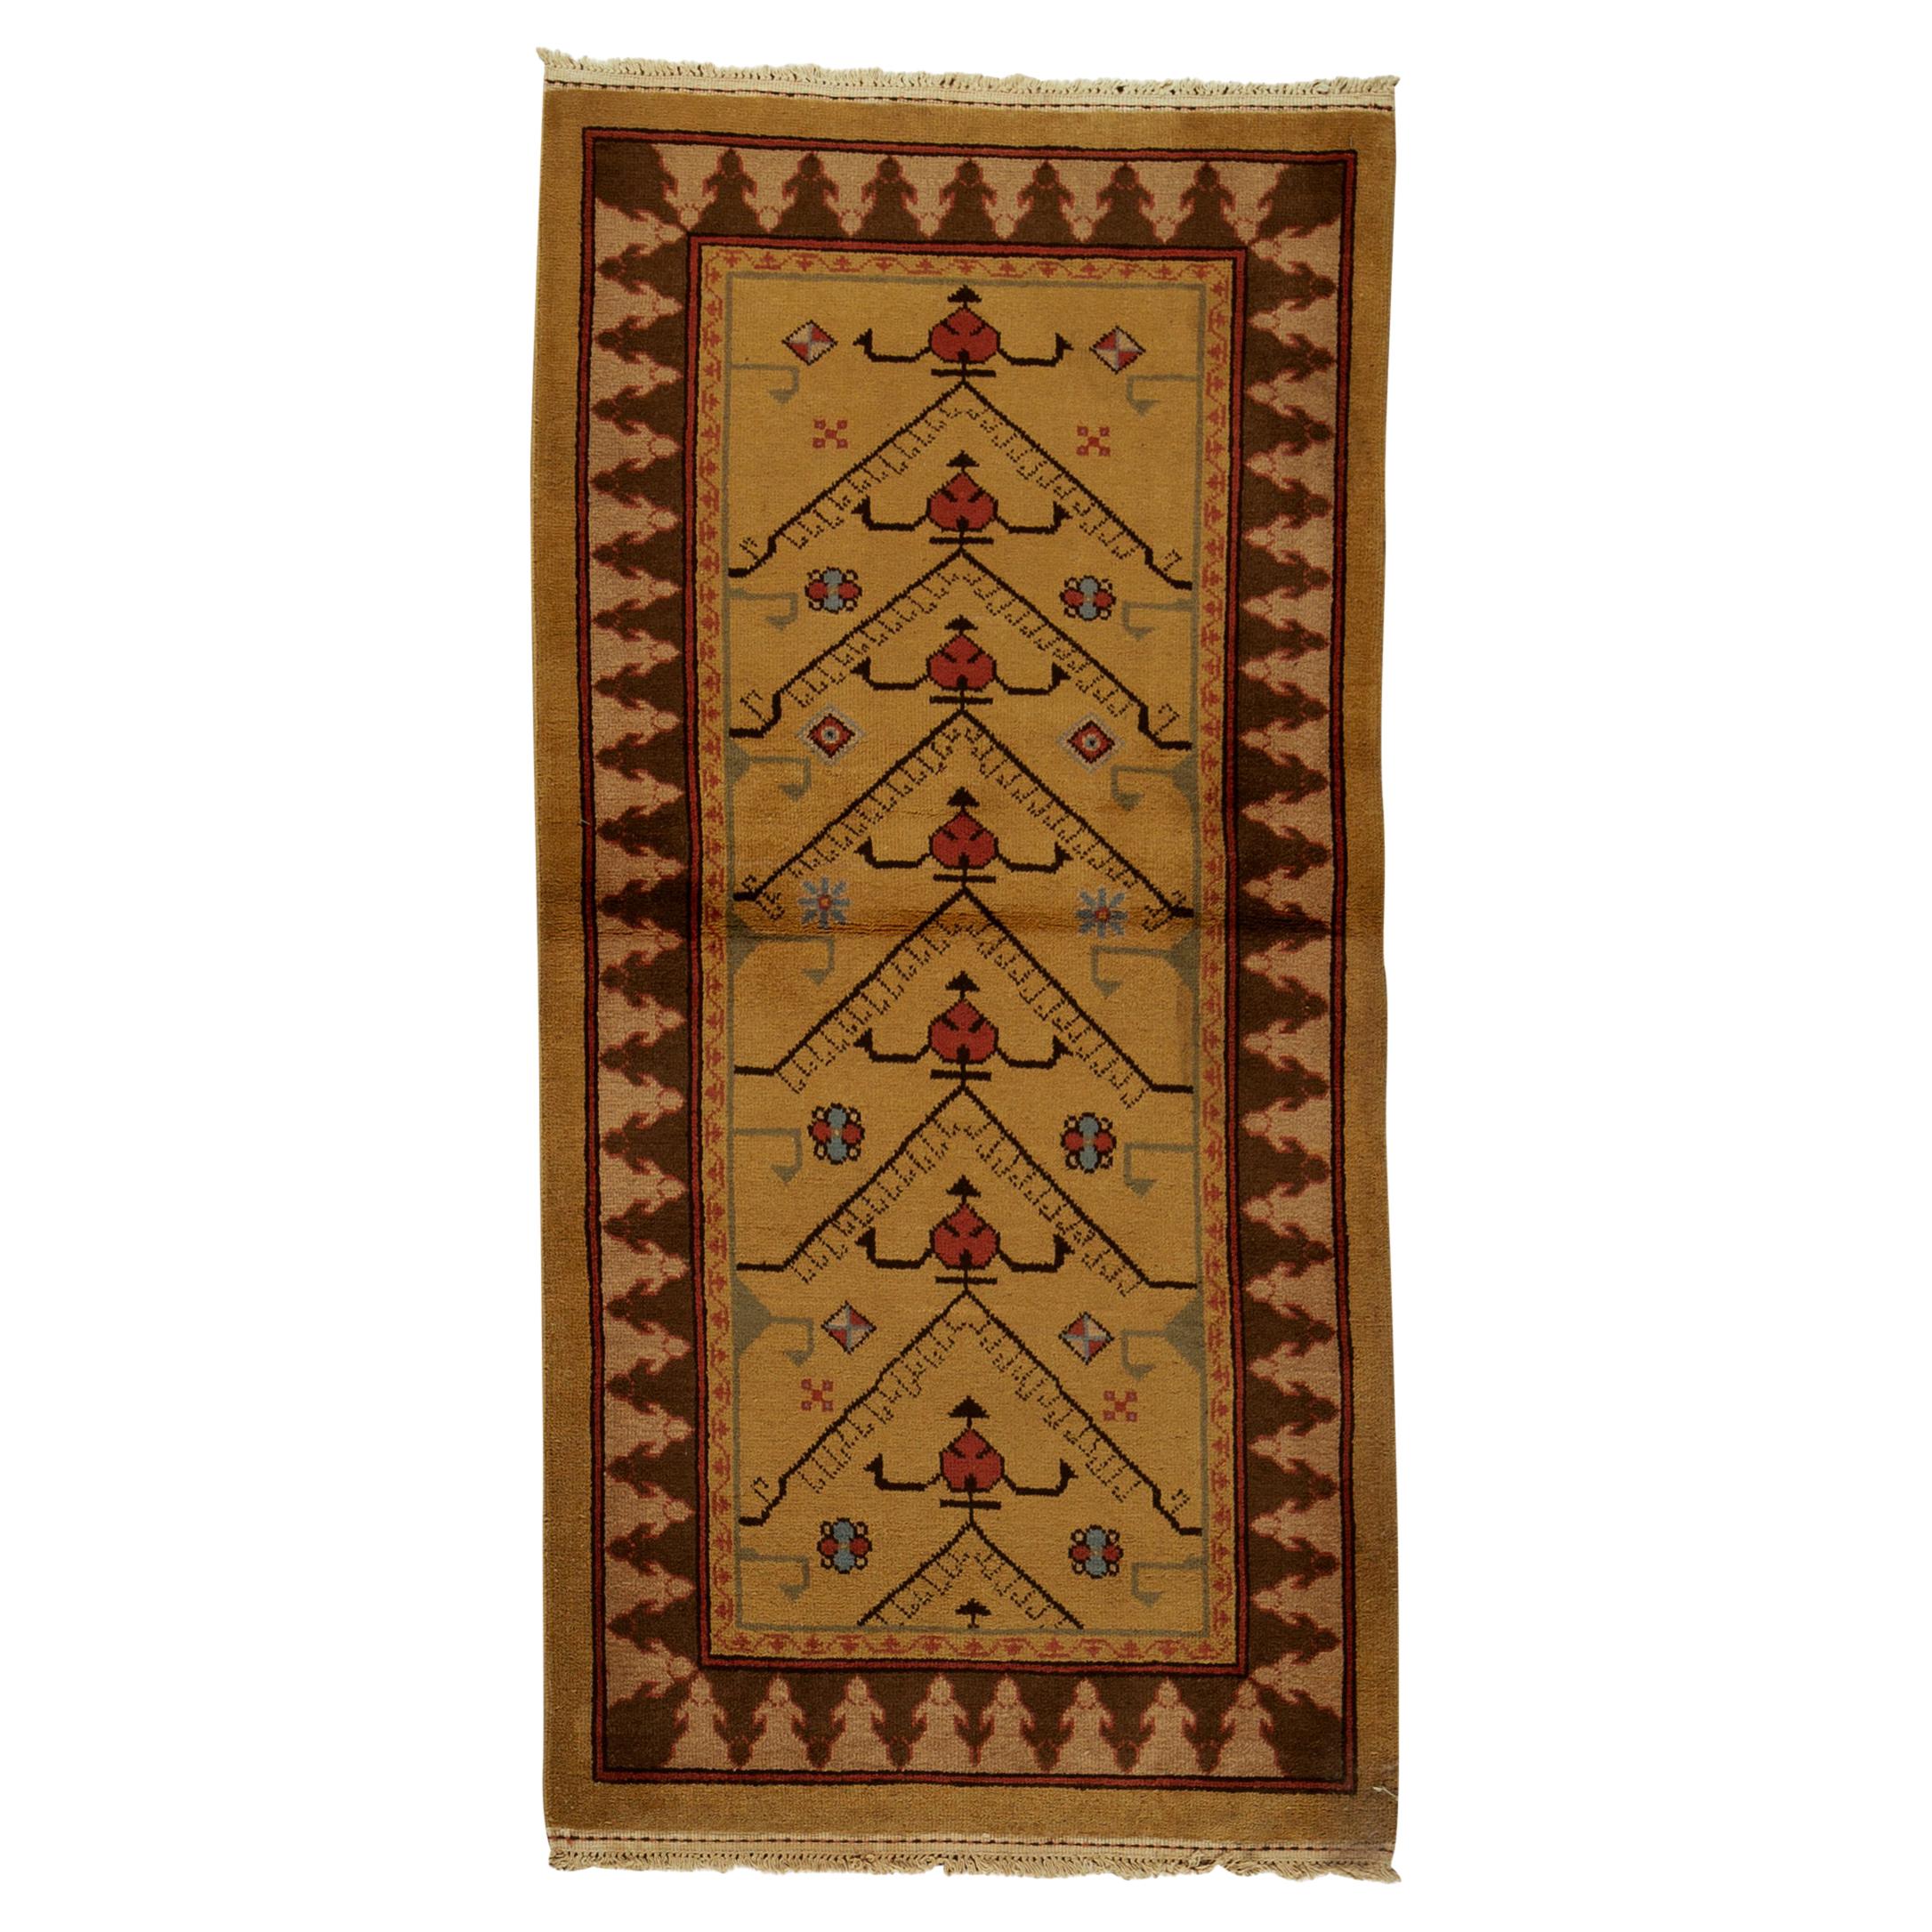  Traditional Handwoven Luxury Wool Semi Antique Gold Rug.